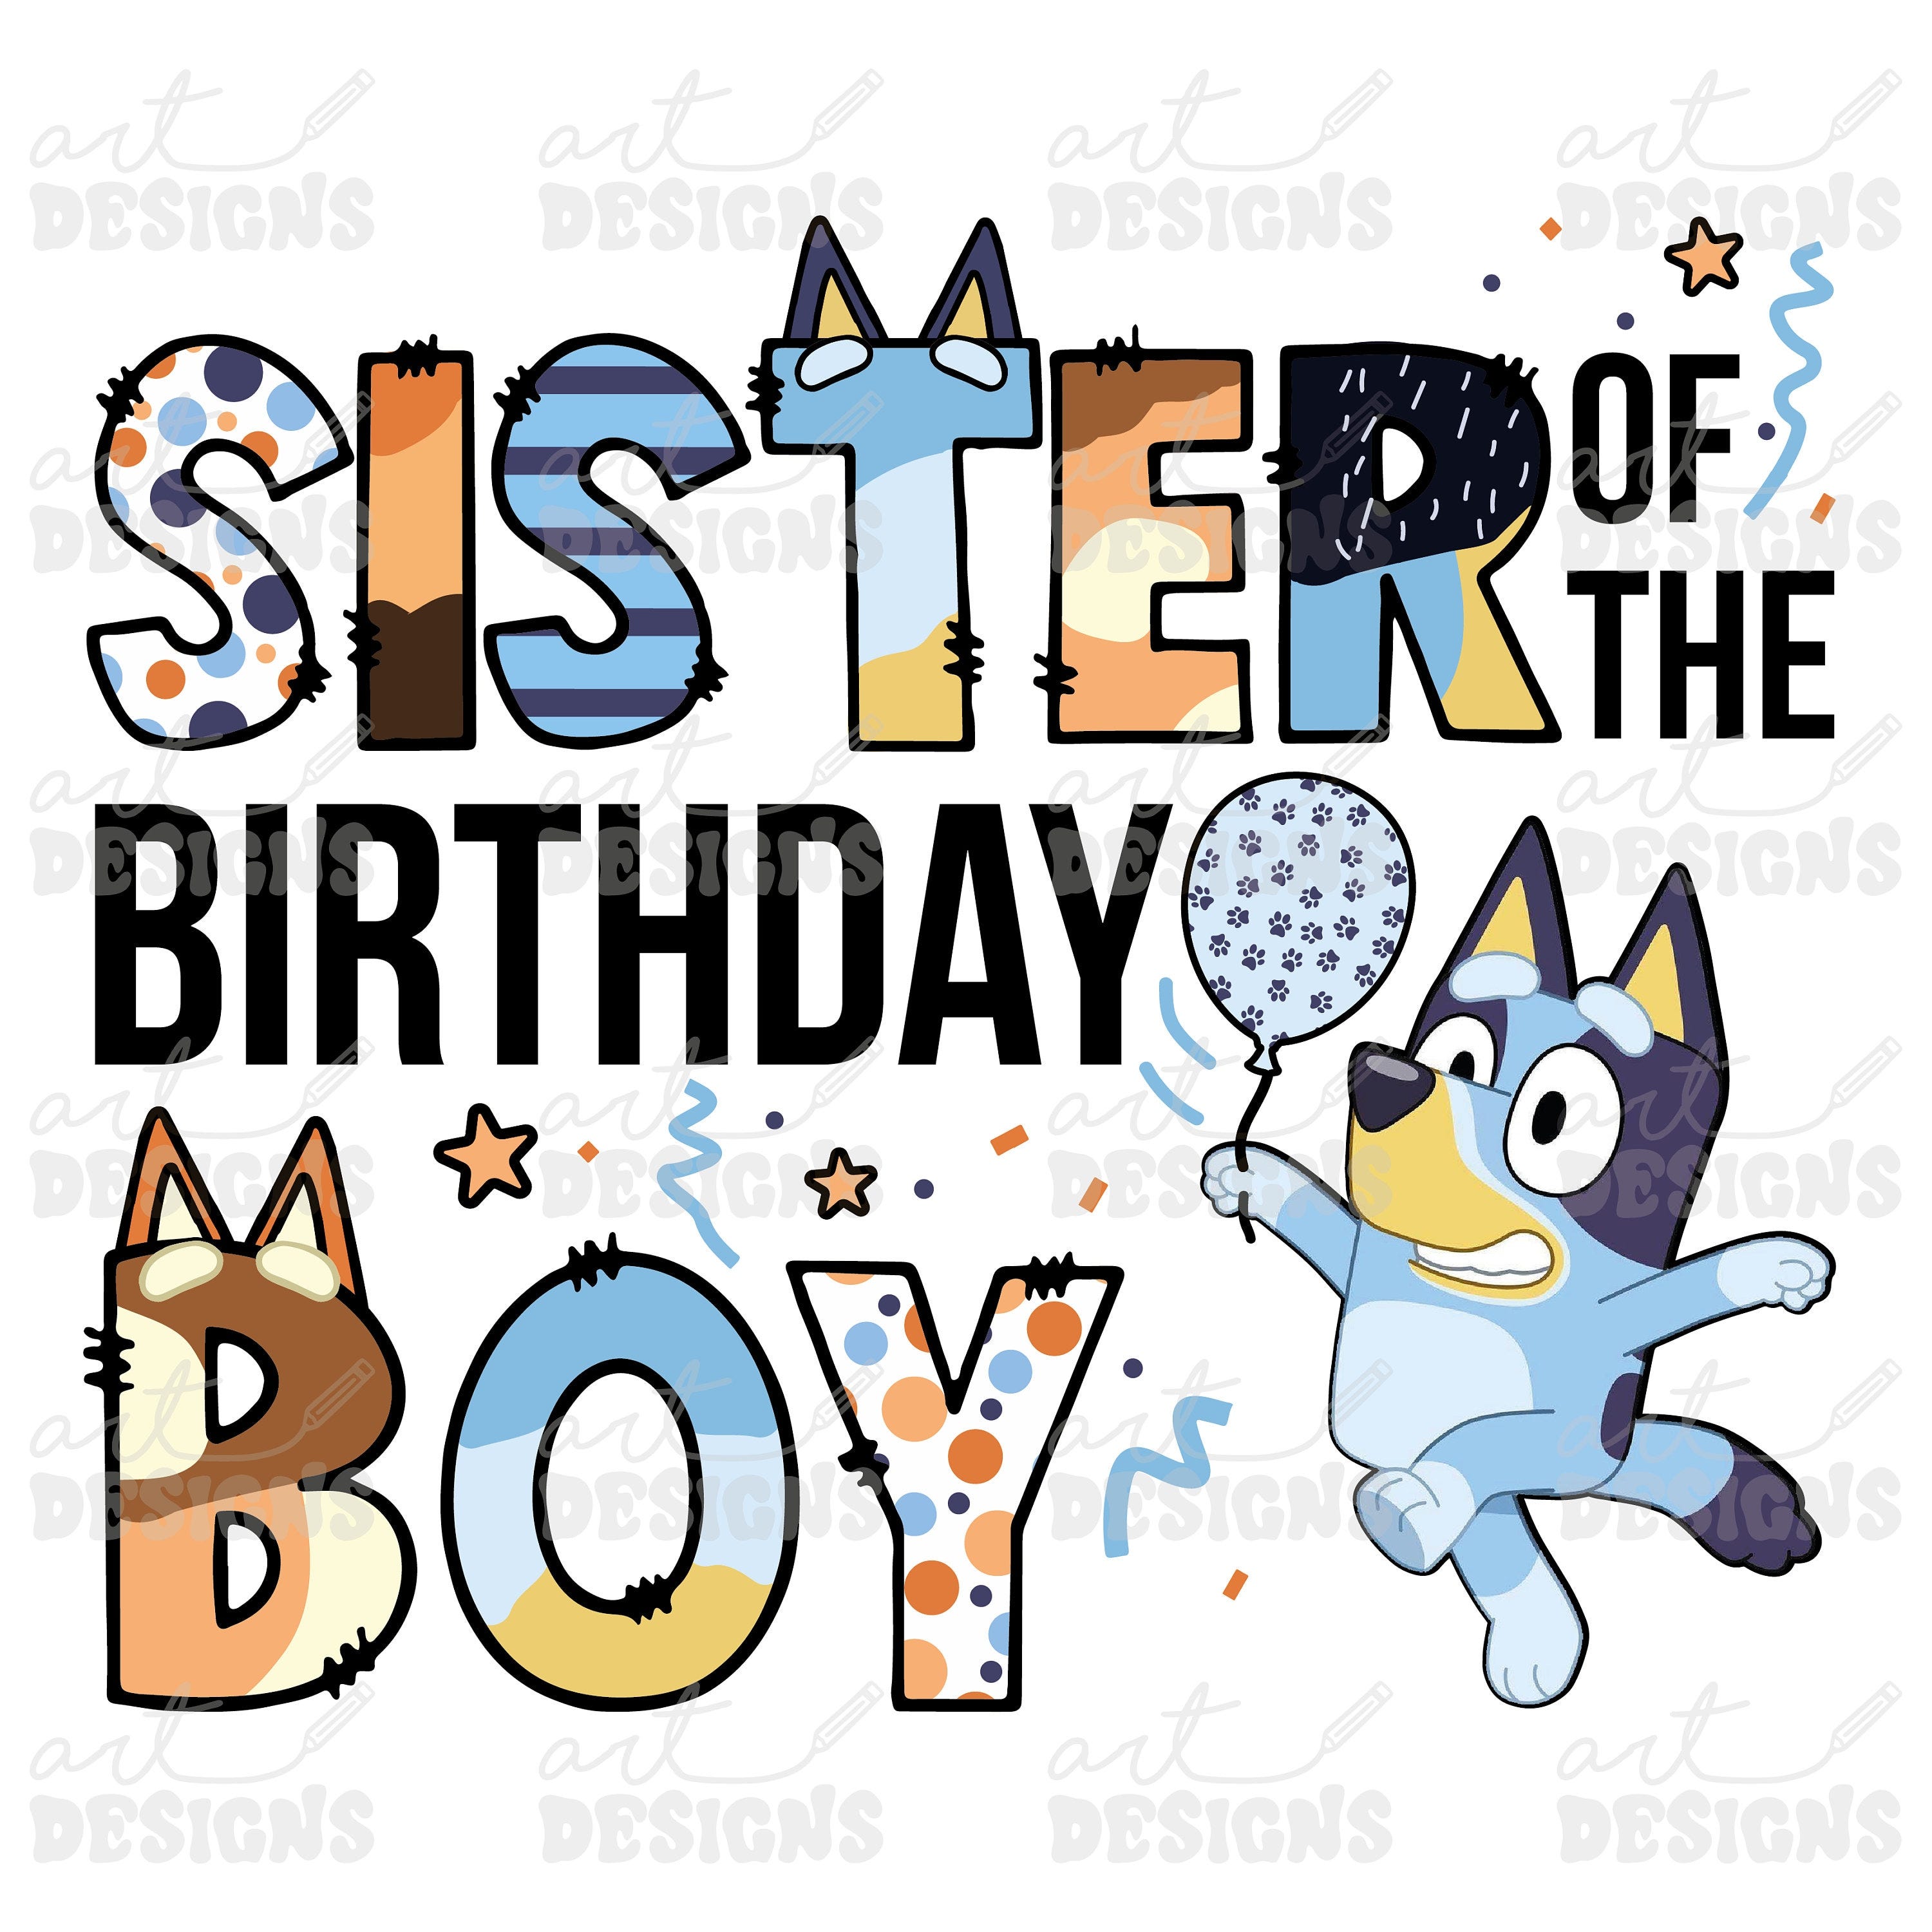 Bluey Sister of the Birthday Boy Clipart Elements, Letters Set, Blue Dog Sublimate Bday Party,  PNG, Family Matching Shirt